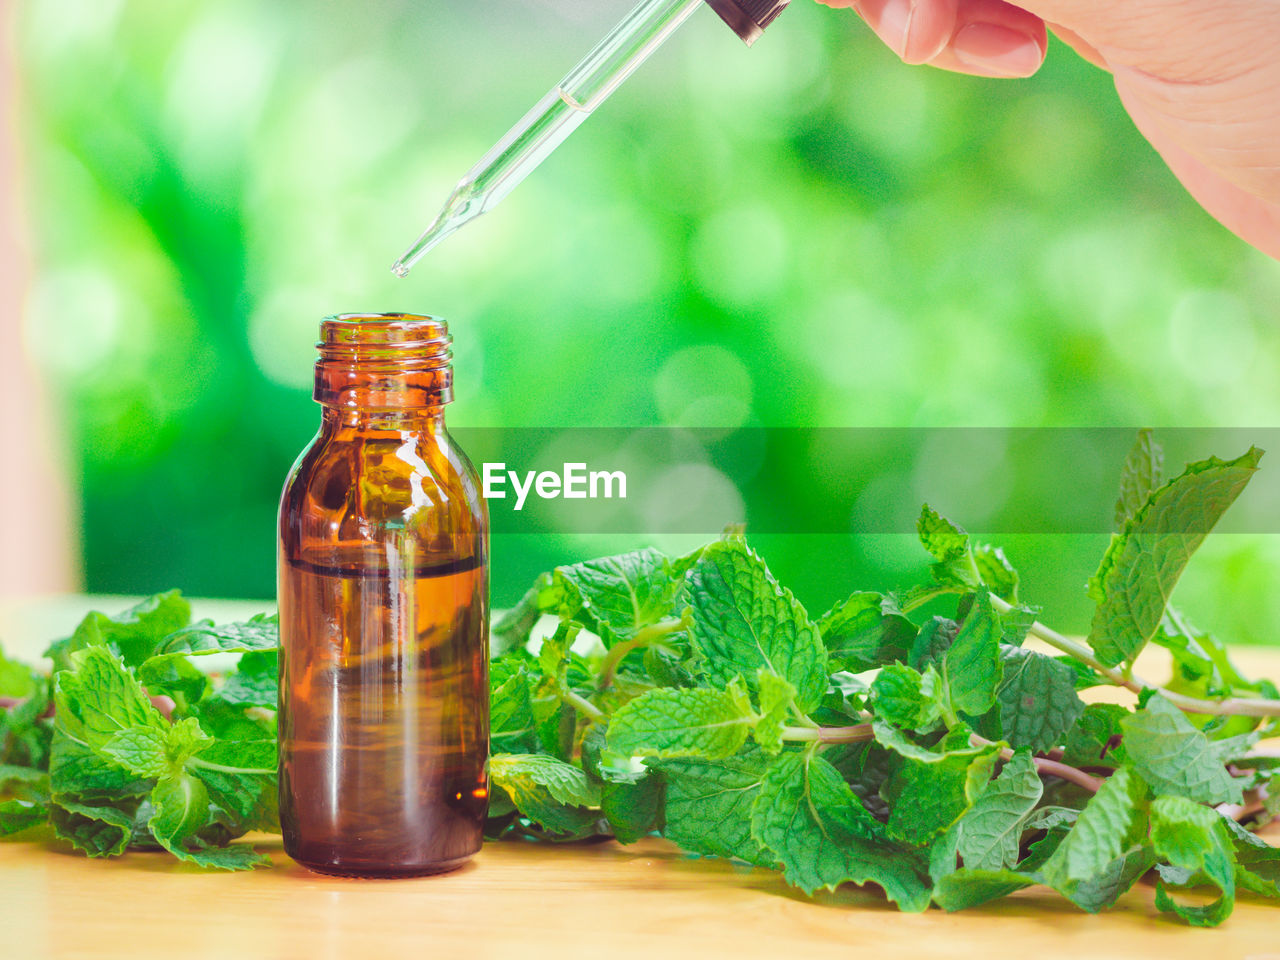 healthcare and medicine, medicine, container, herb, food and drink, green, bottle, hand, leaf, food, plant, plant part, herbal medicine, nature, produce, drink, wellbeing, adult, indoors, science, one person, healthy eating, vegetable, close-up, glass, alternative medicine